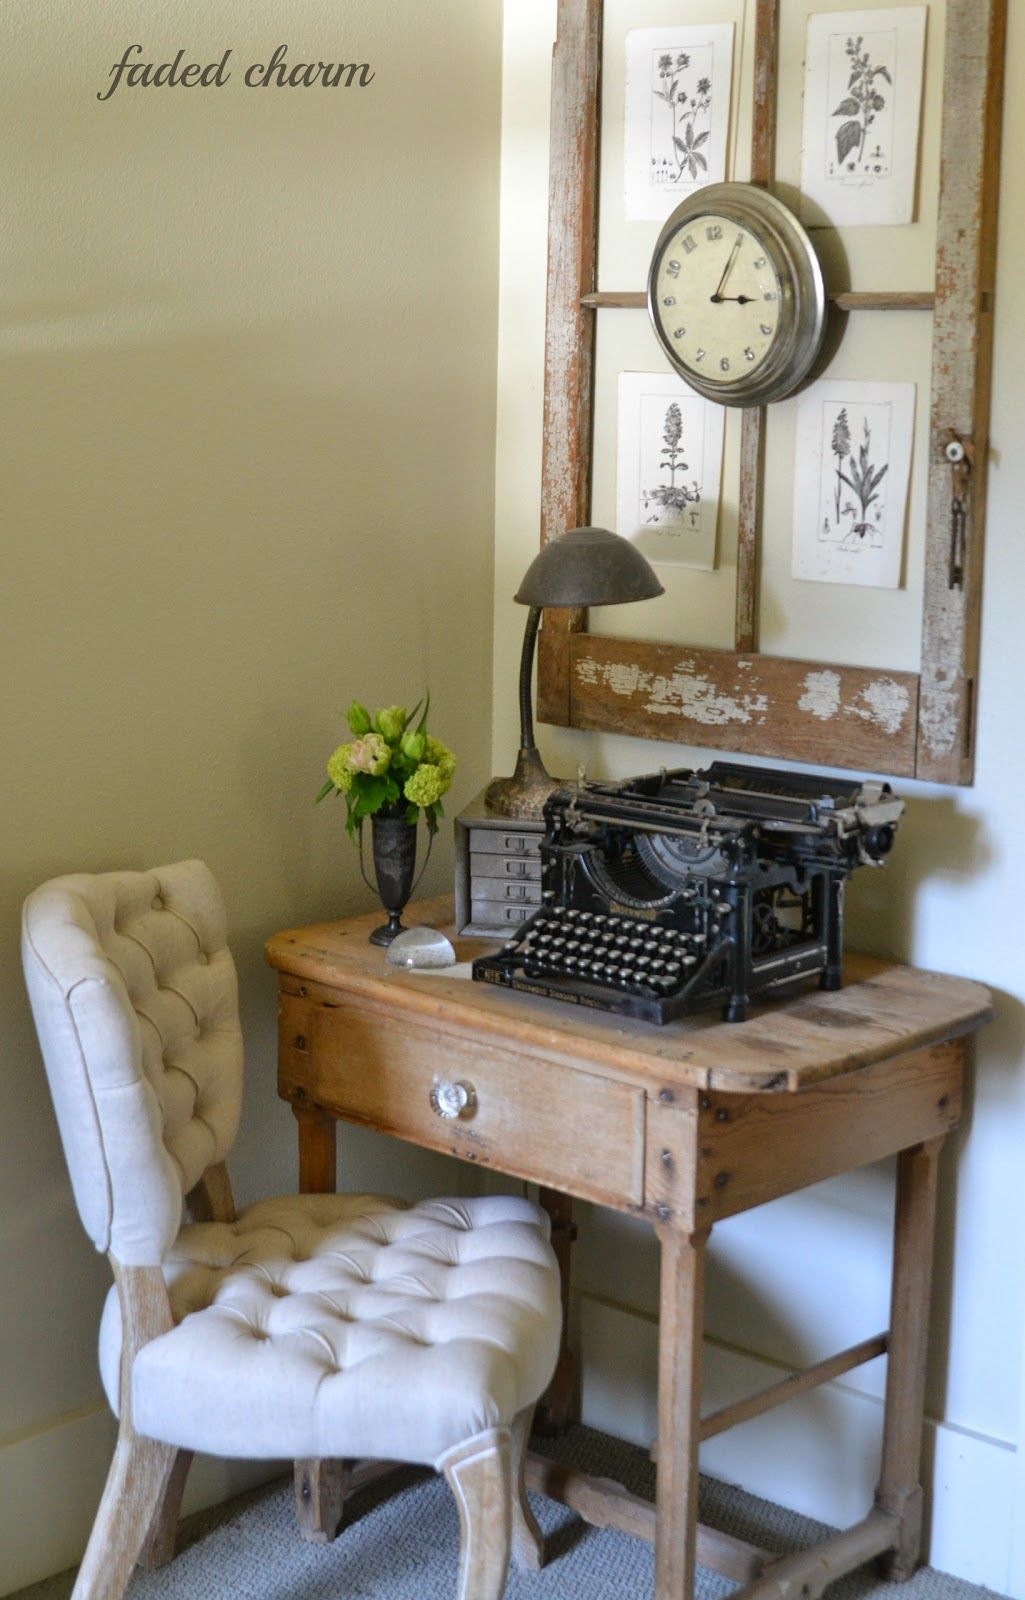 Desk charm with an old window frame